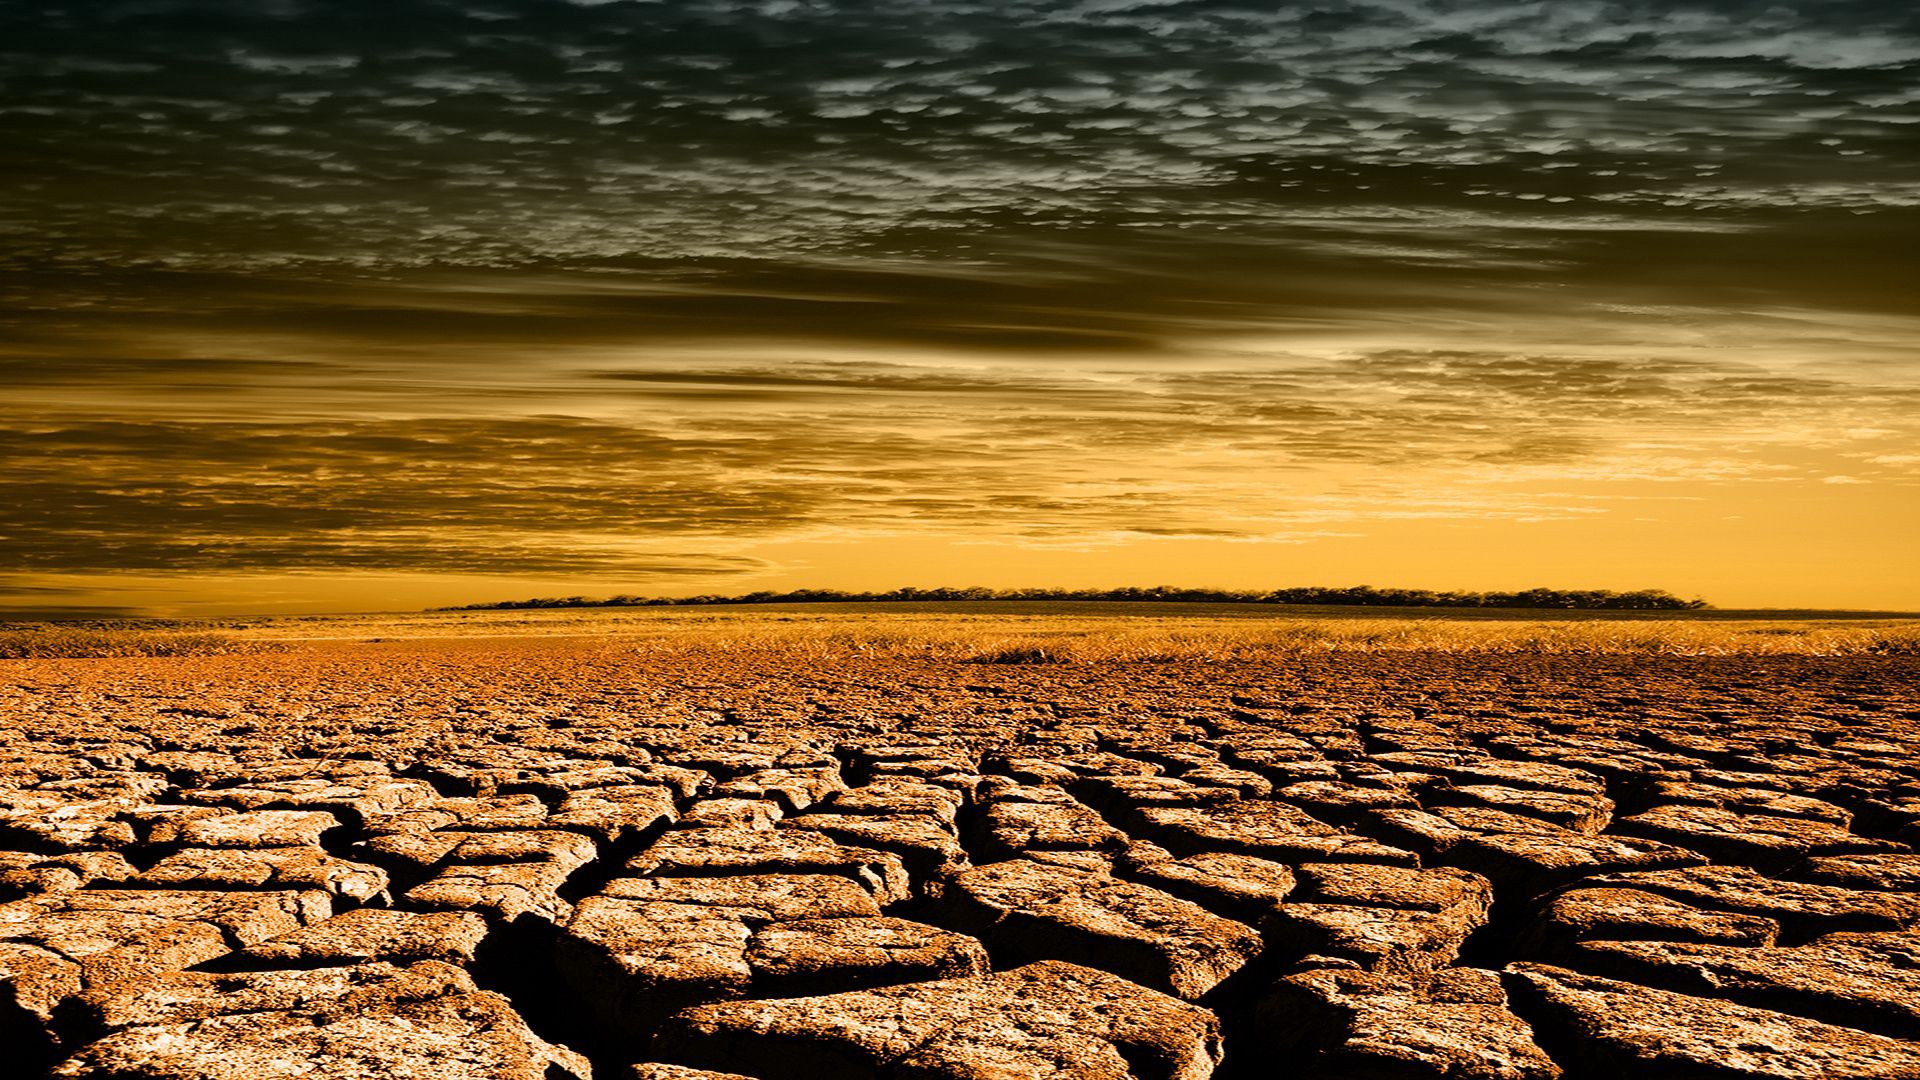 heat, drought, wasteland, land home screen for smartphone